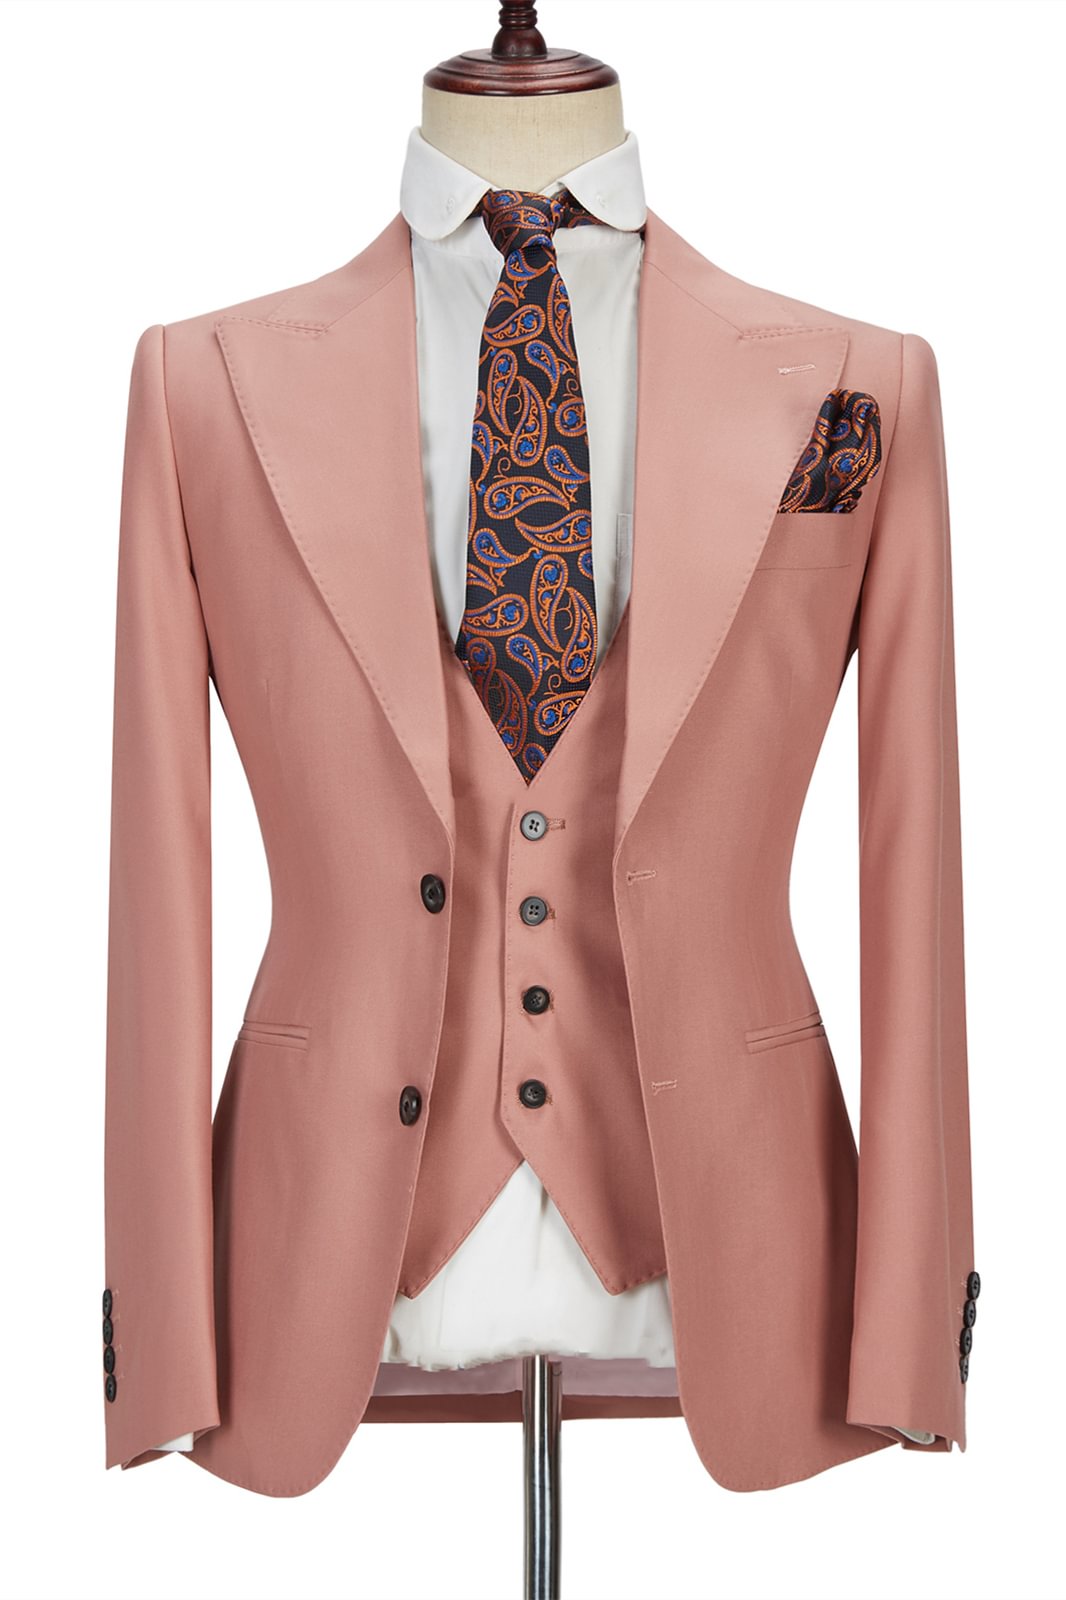 Chic 2 Buttons Pink Marriage Suit For Men 3 Pieces With Peak Lapel | Ballbellas Ballbellas